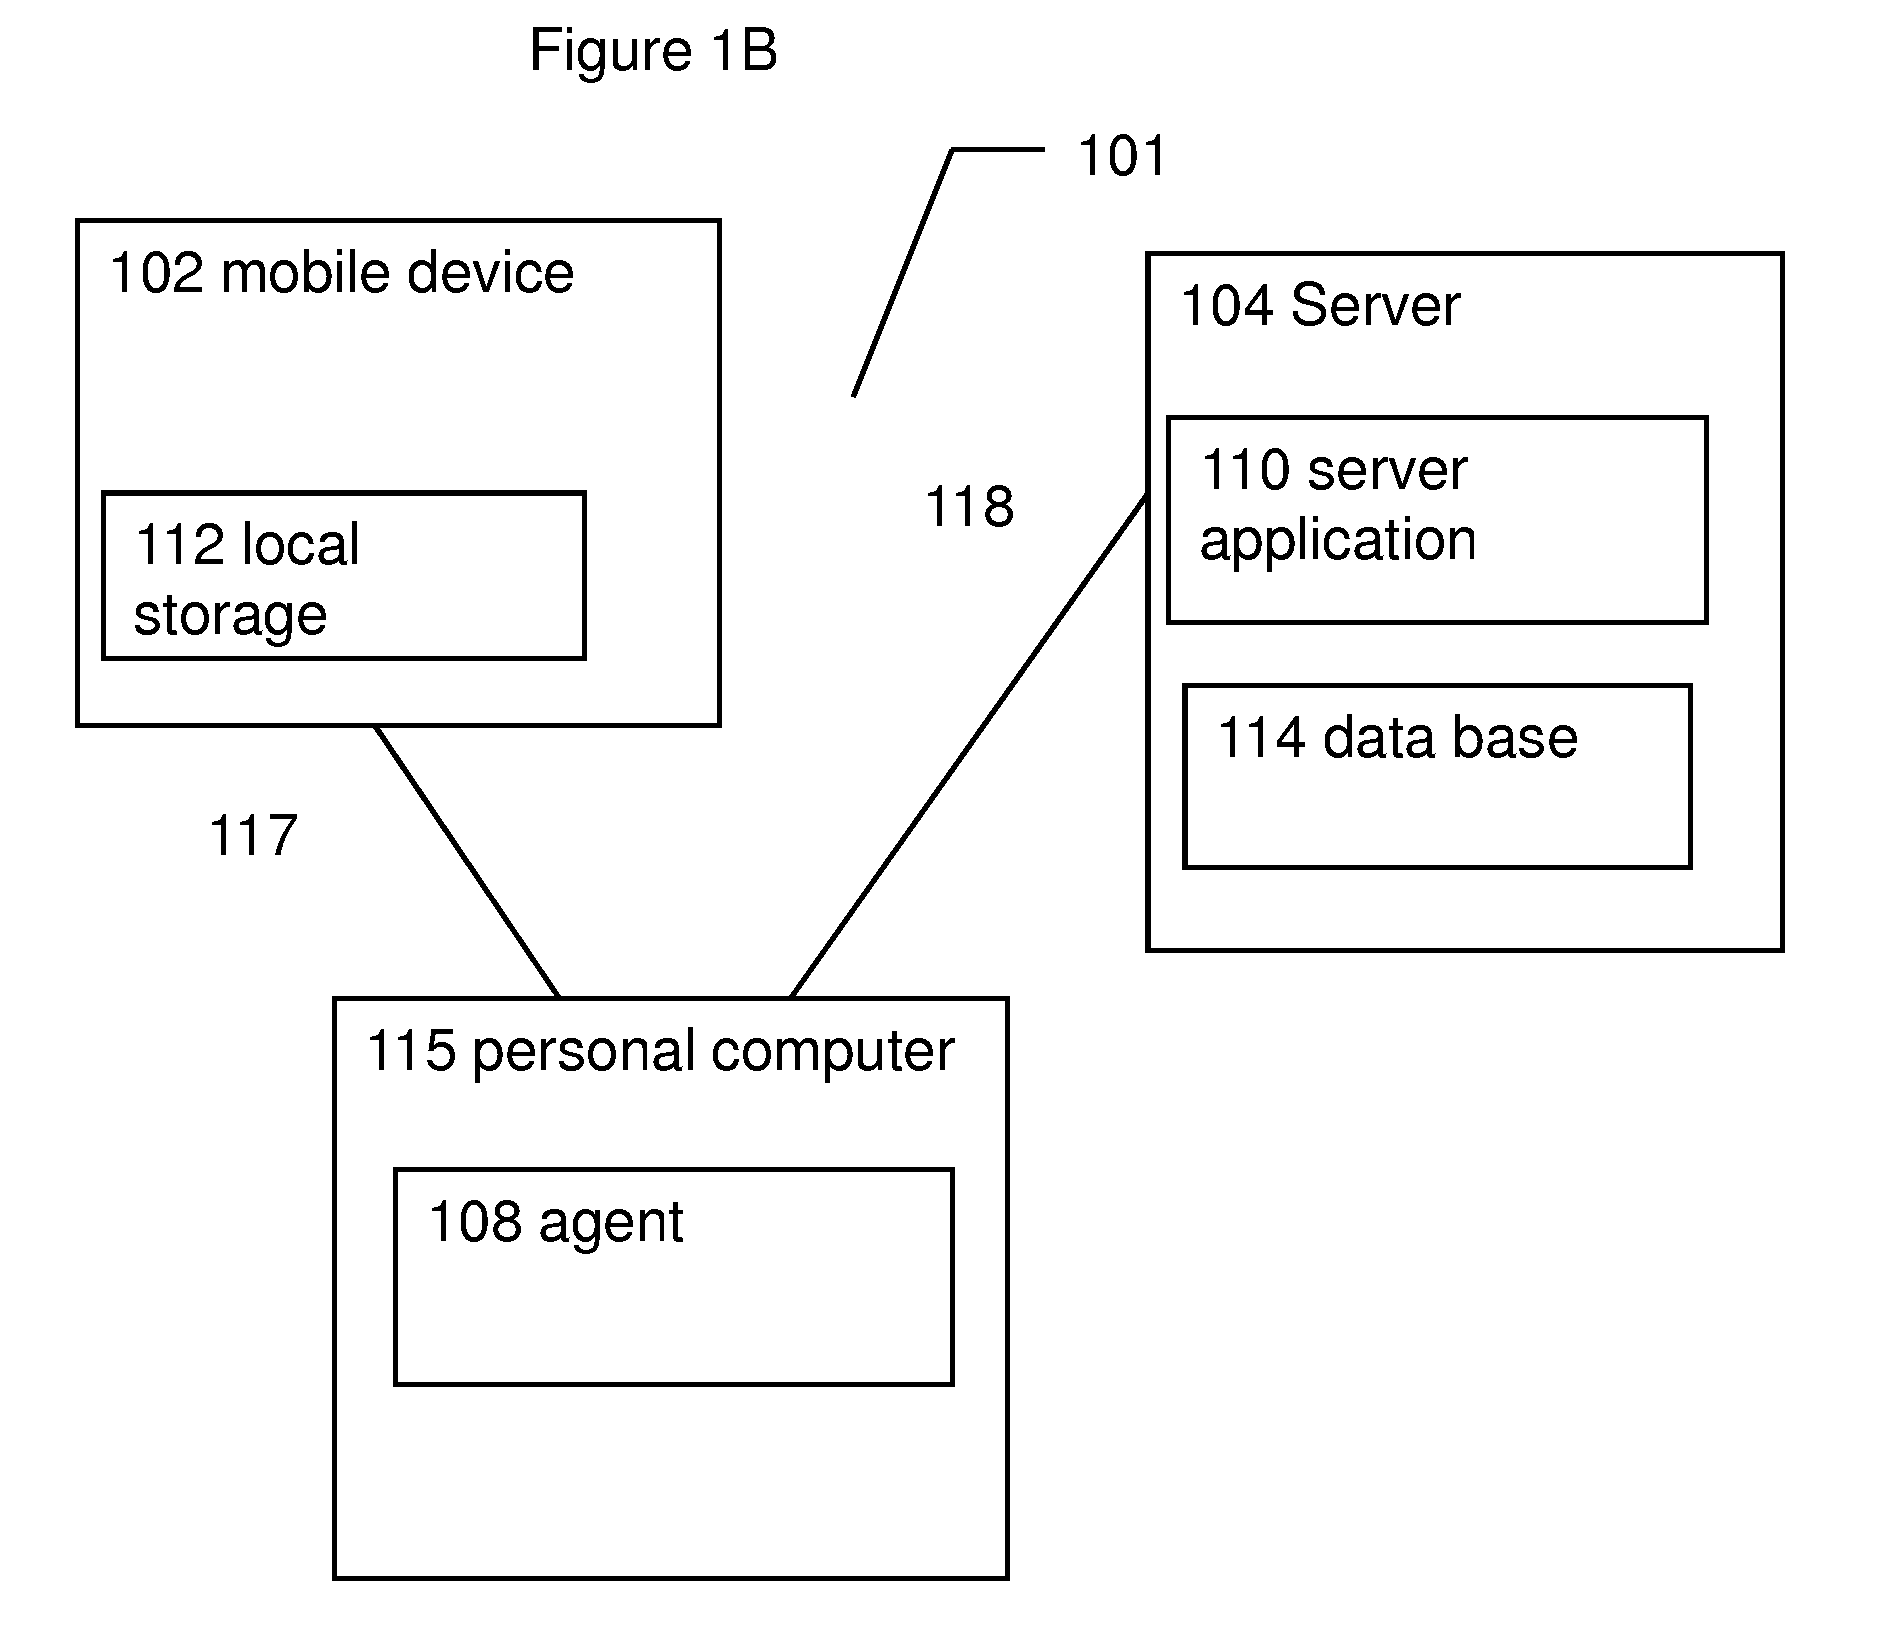 System and method for using a computer as a bridge for data synchronization between a cellular device and a computer network